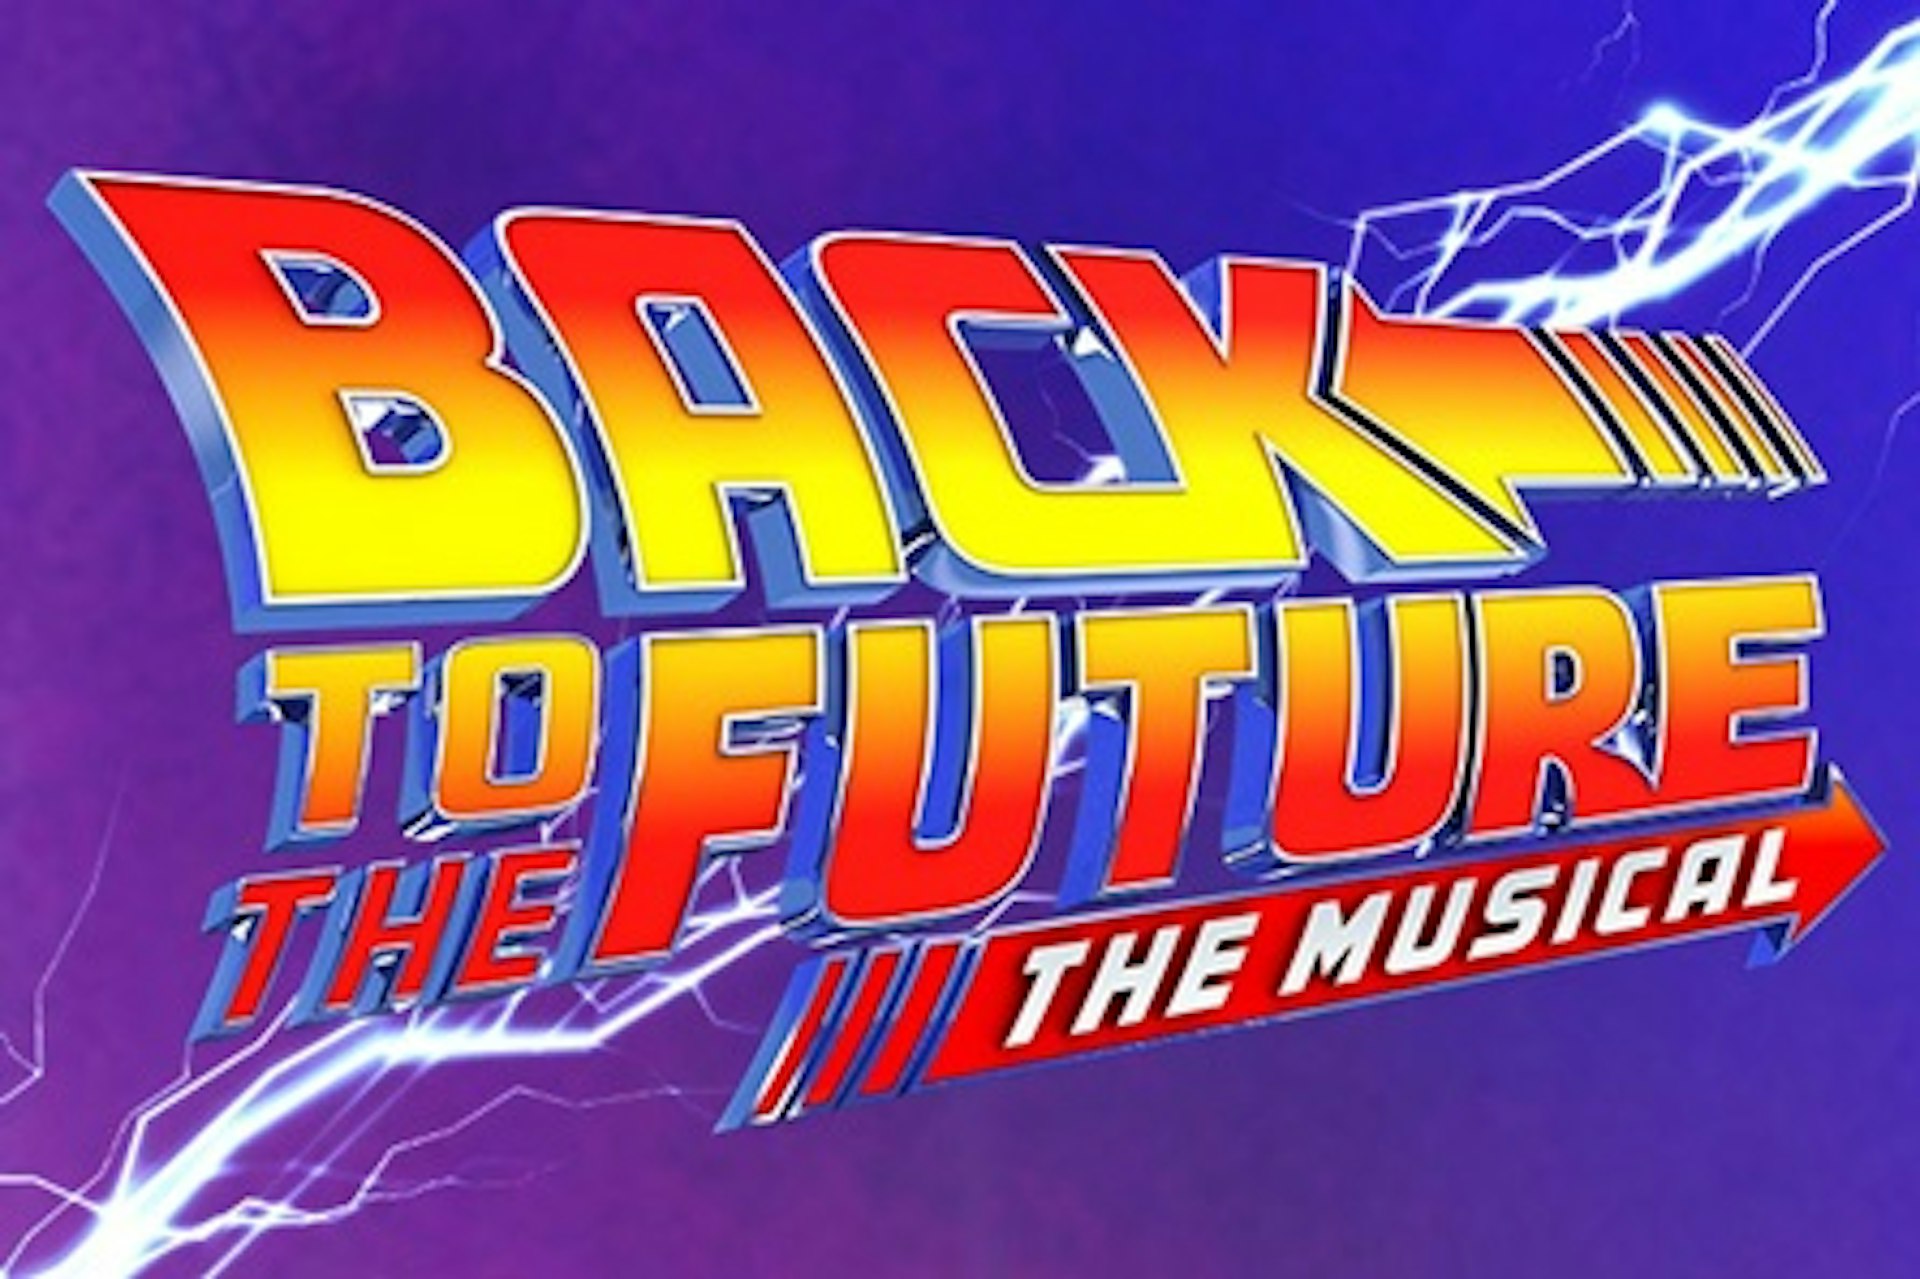 Back to The Future The Musical with Meal and Overnight Stay at the Hoxton Hotel or Two 4